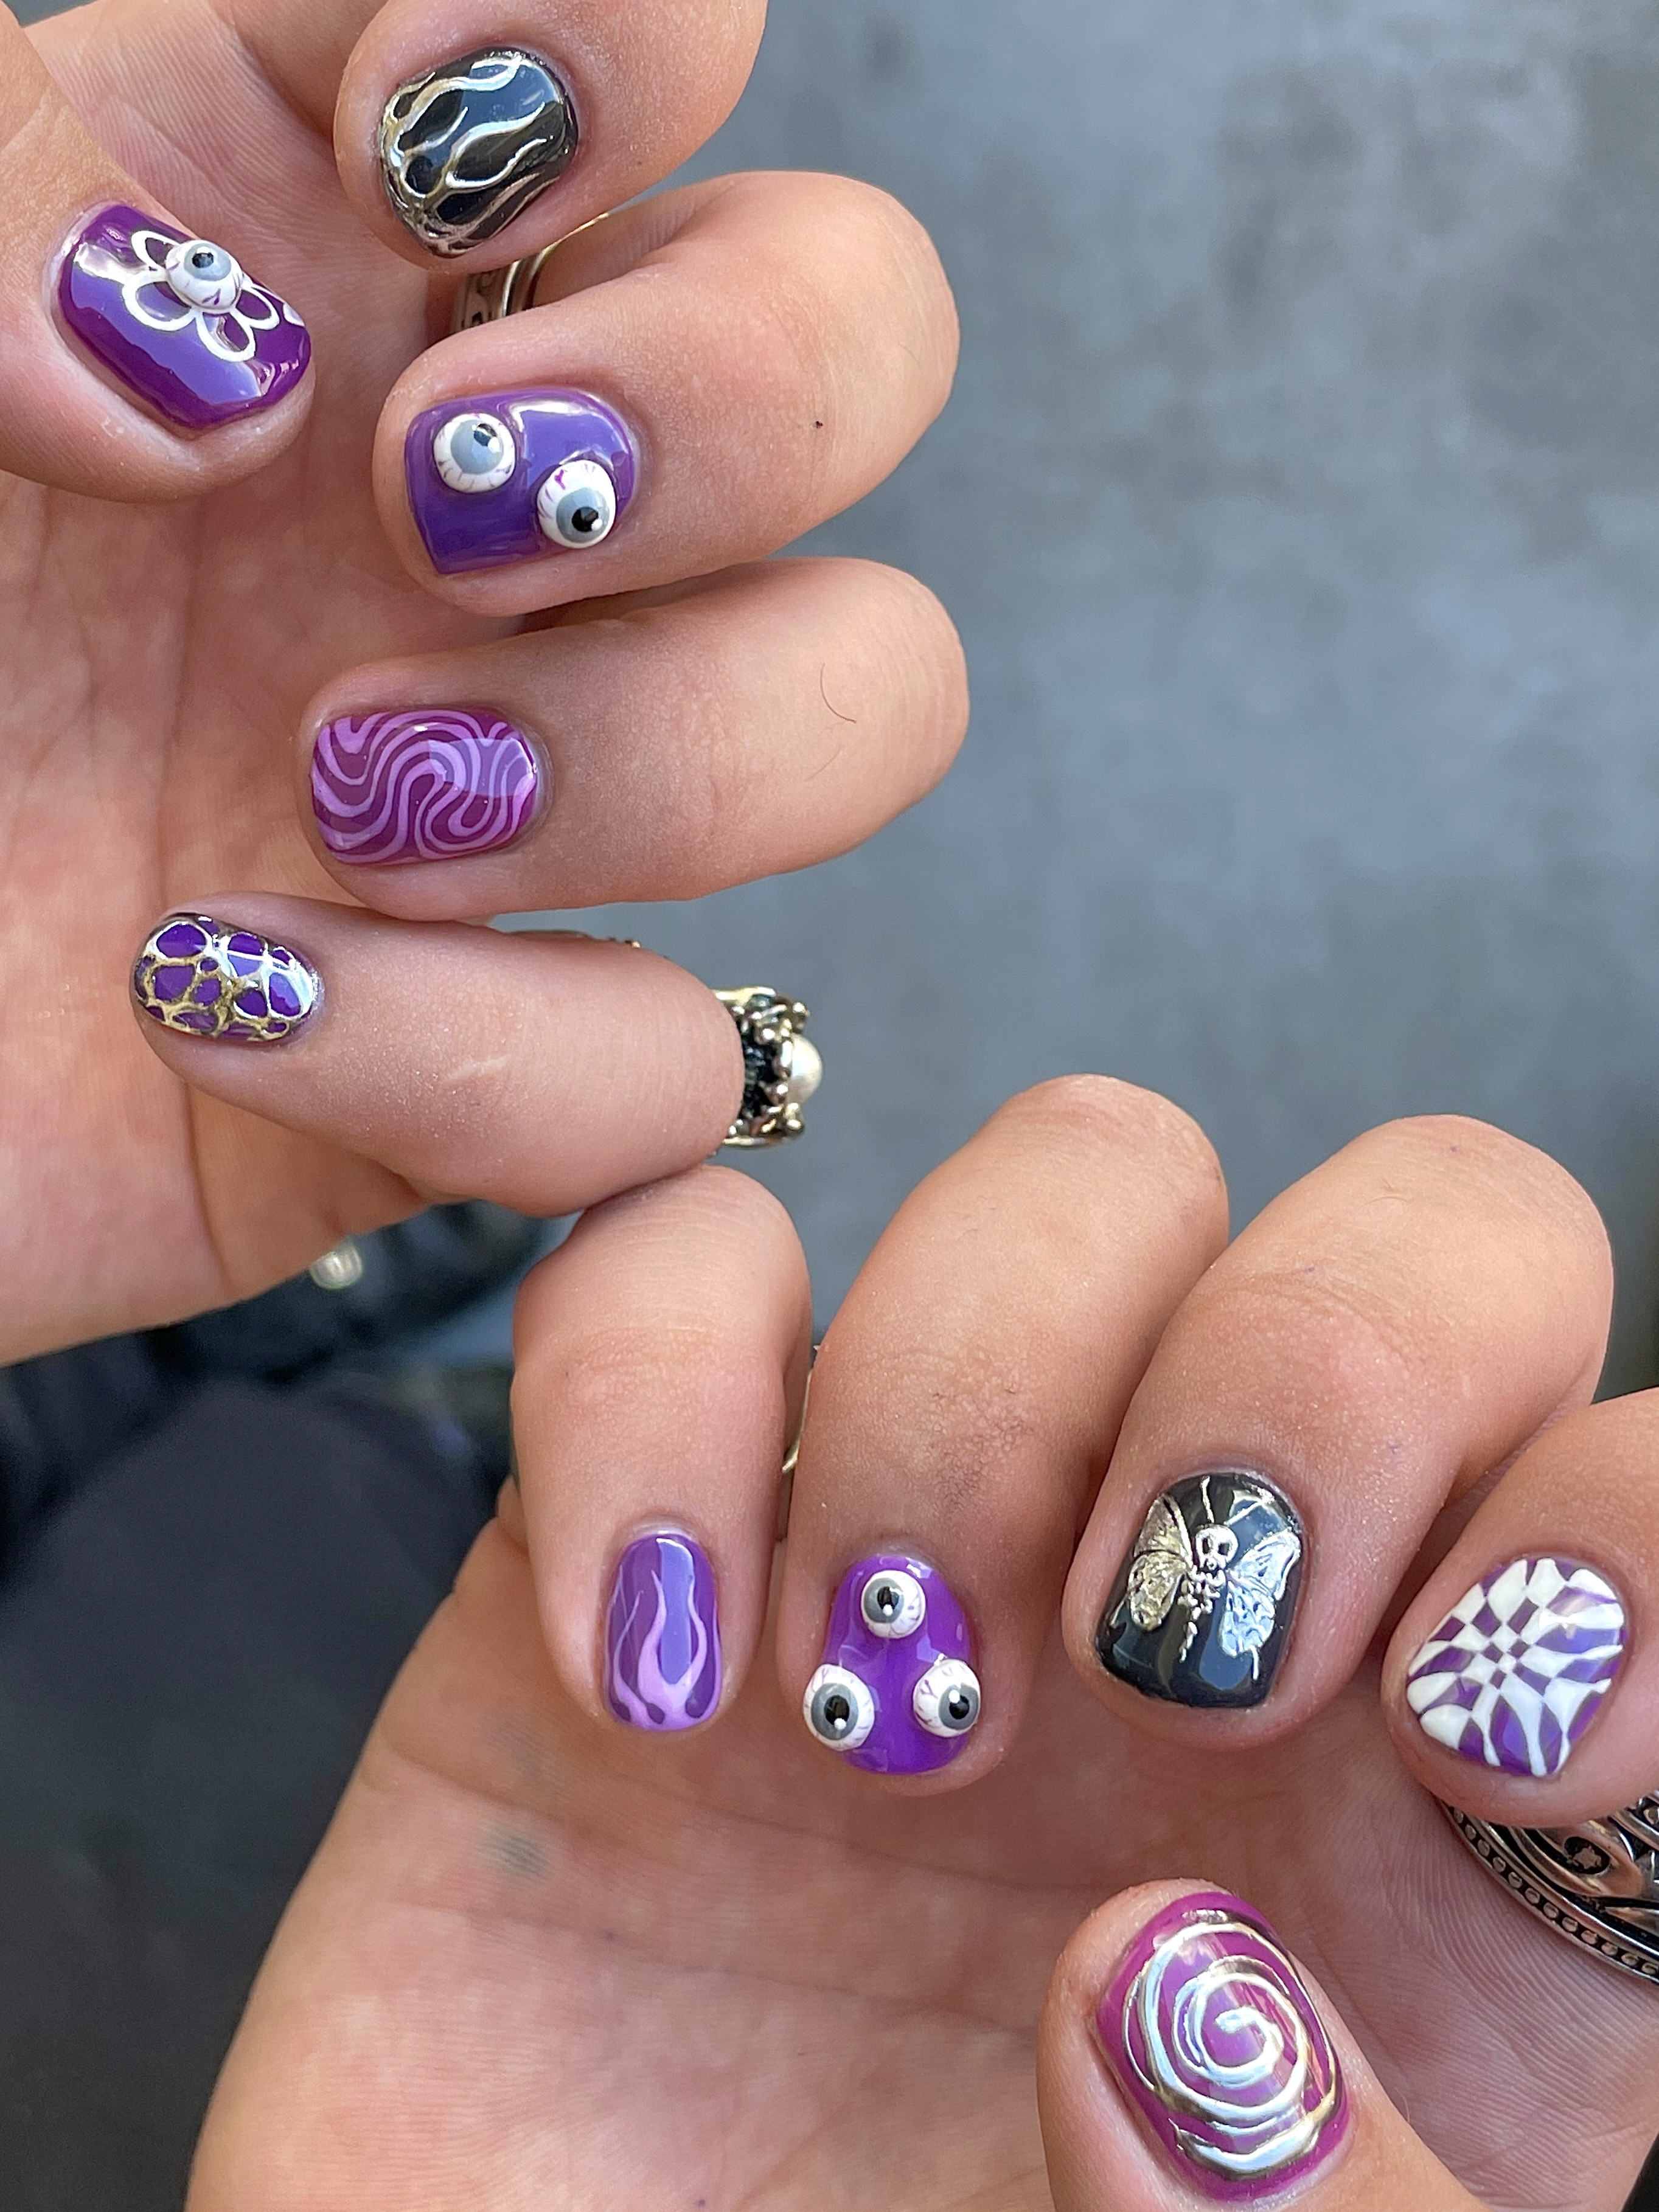 Man lets girlfriend practice her nail art skills on him - See Pictures |  Trending & Viral News